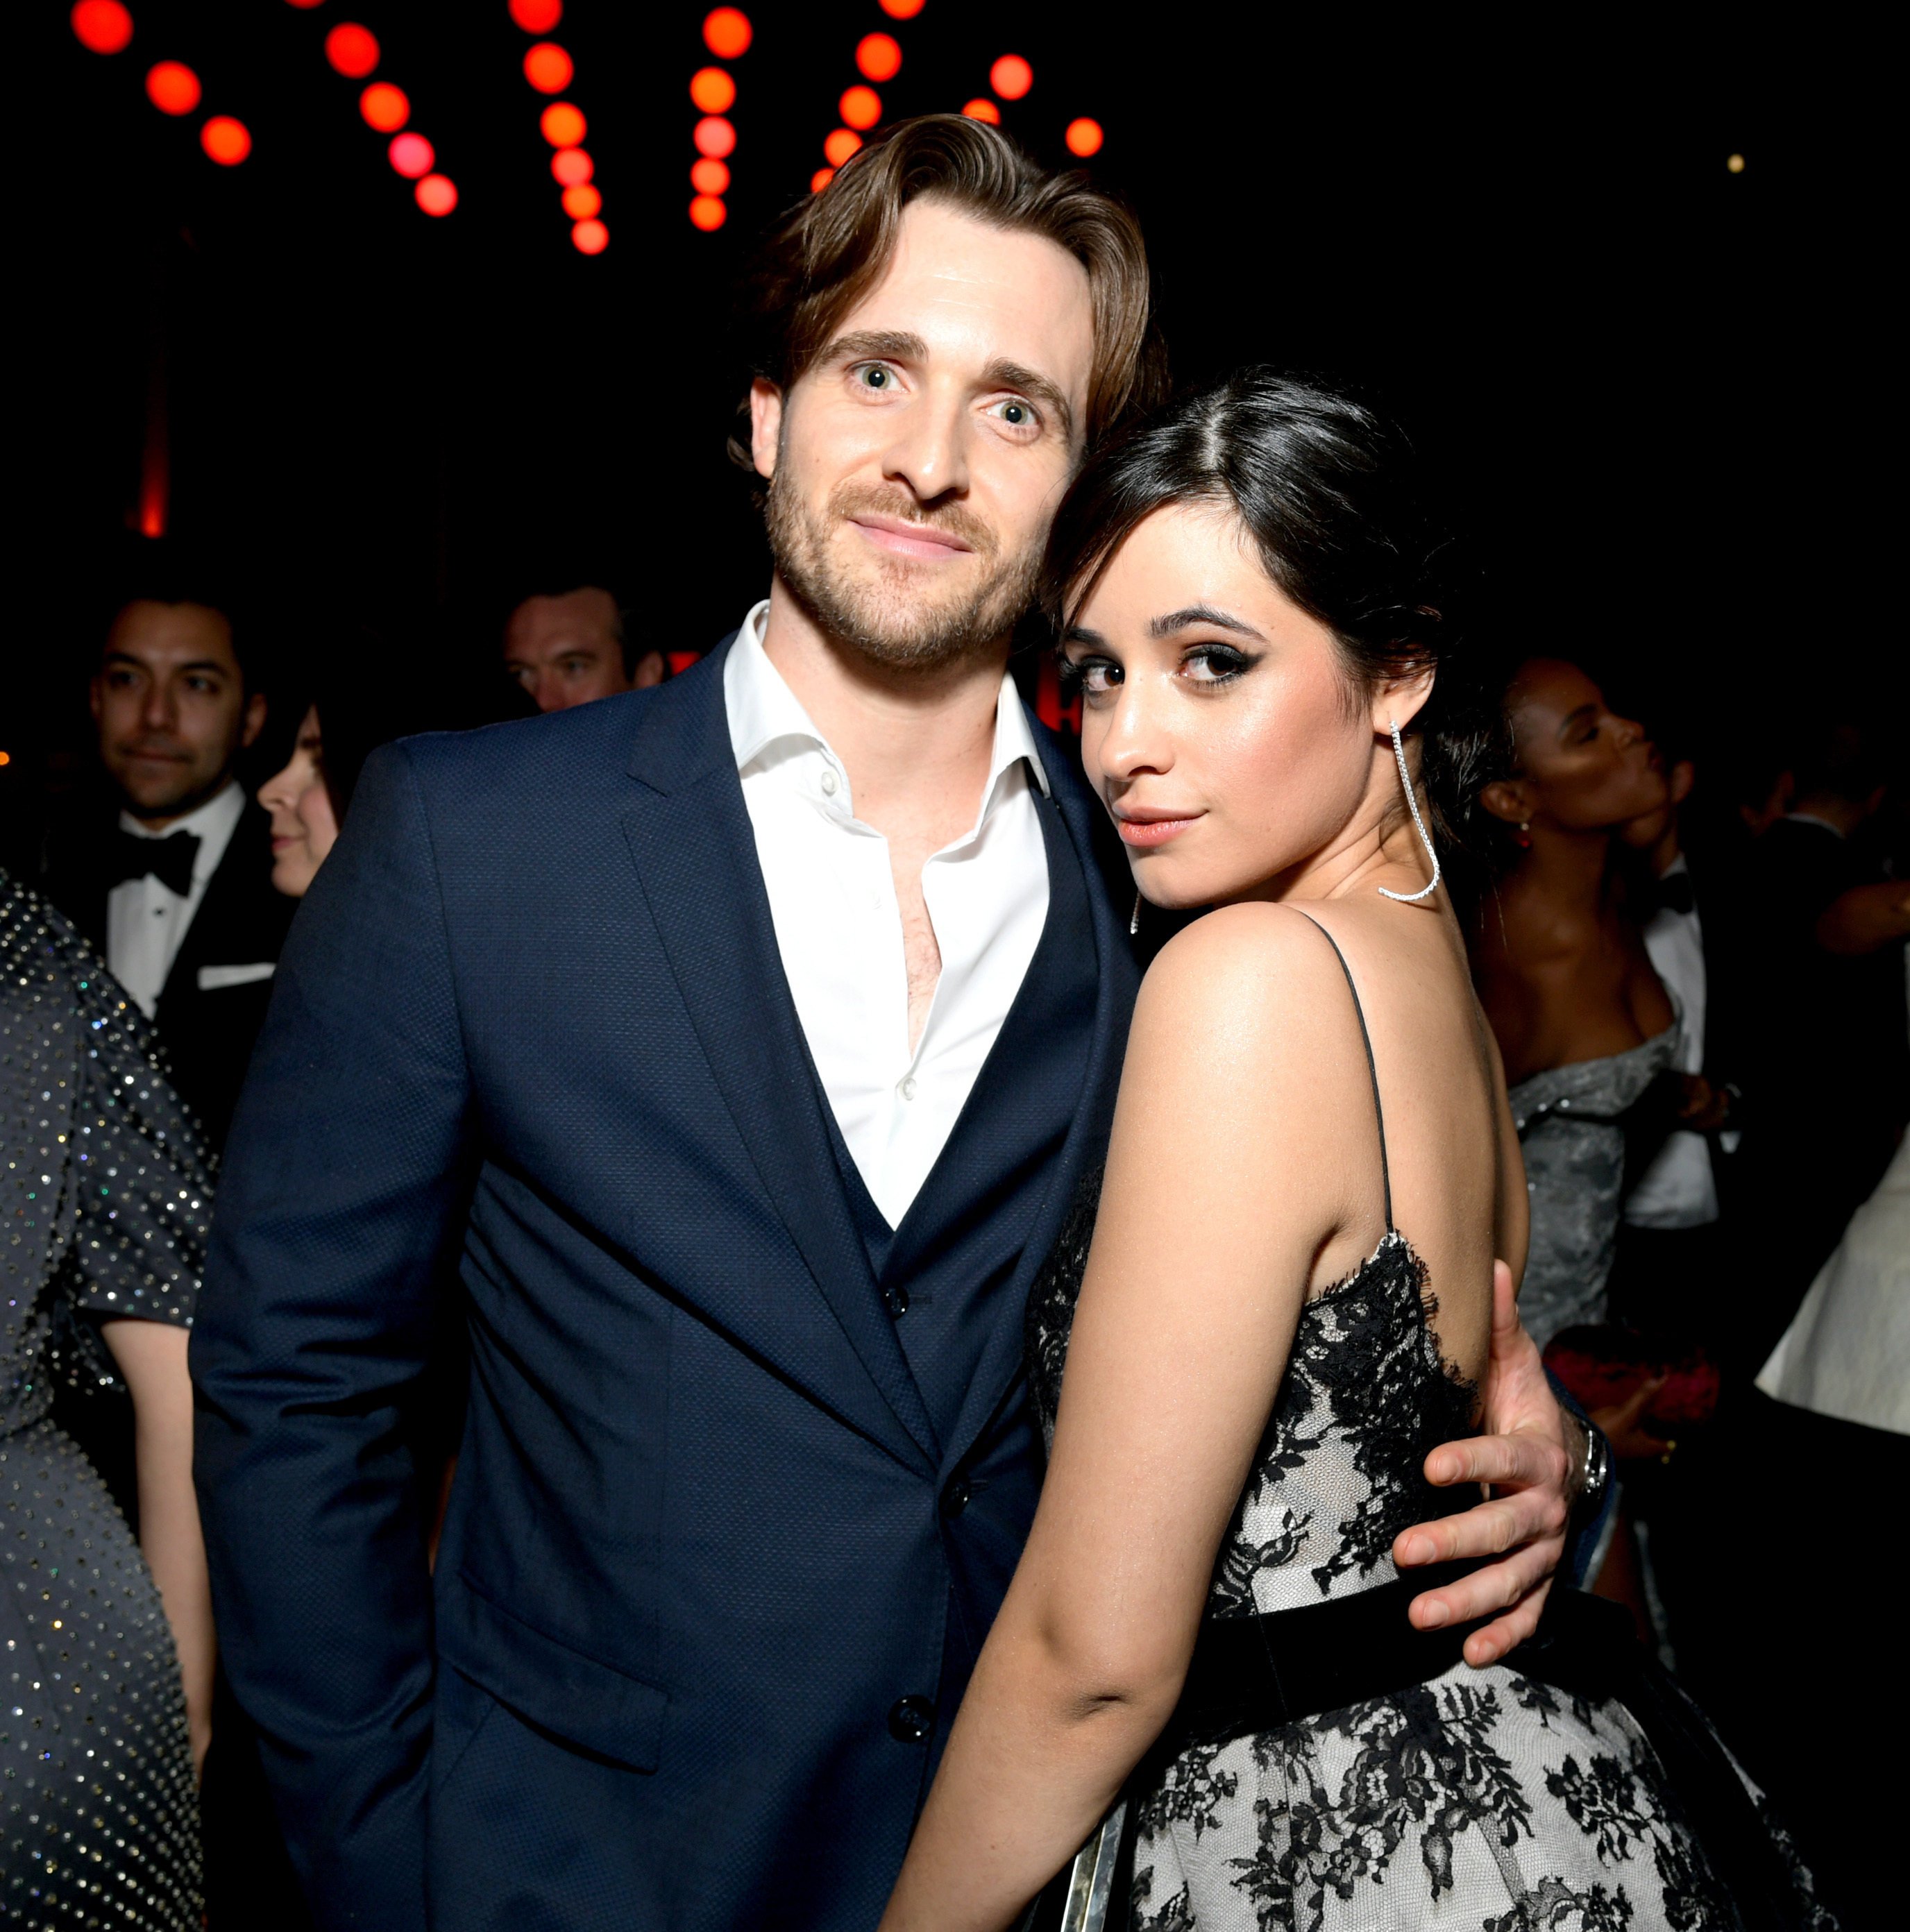 Matthew Hussey and Camila Cabello at the 2019 Vanity Fair Oscar Party. The pair met on the set of the Today show in 2018. Photo: WireImage